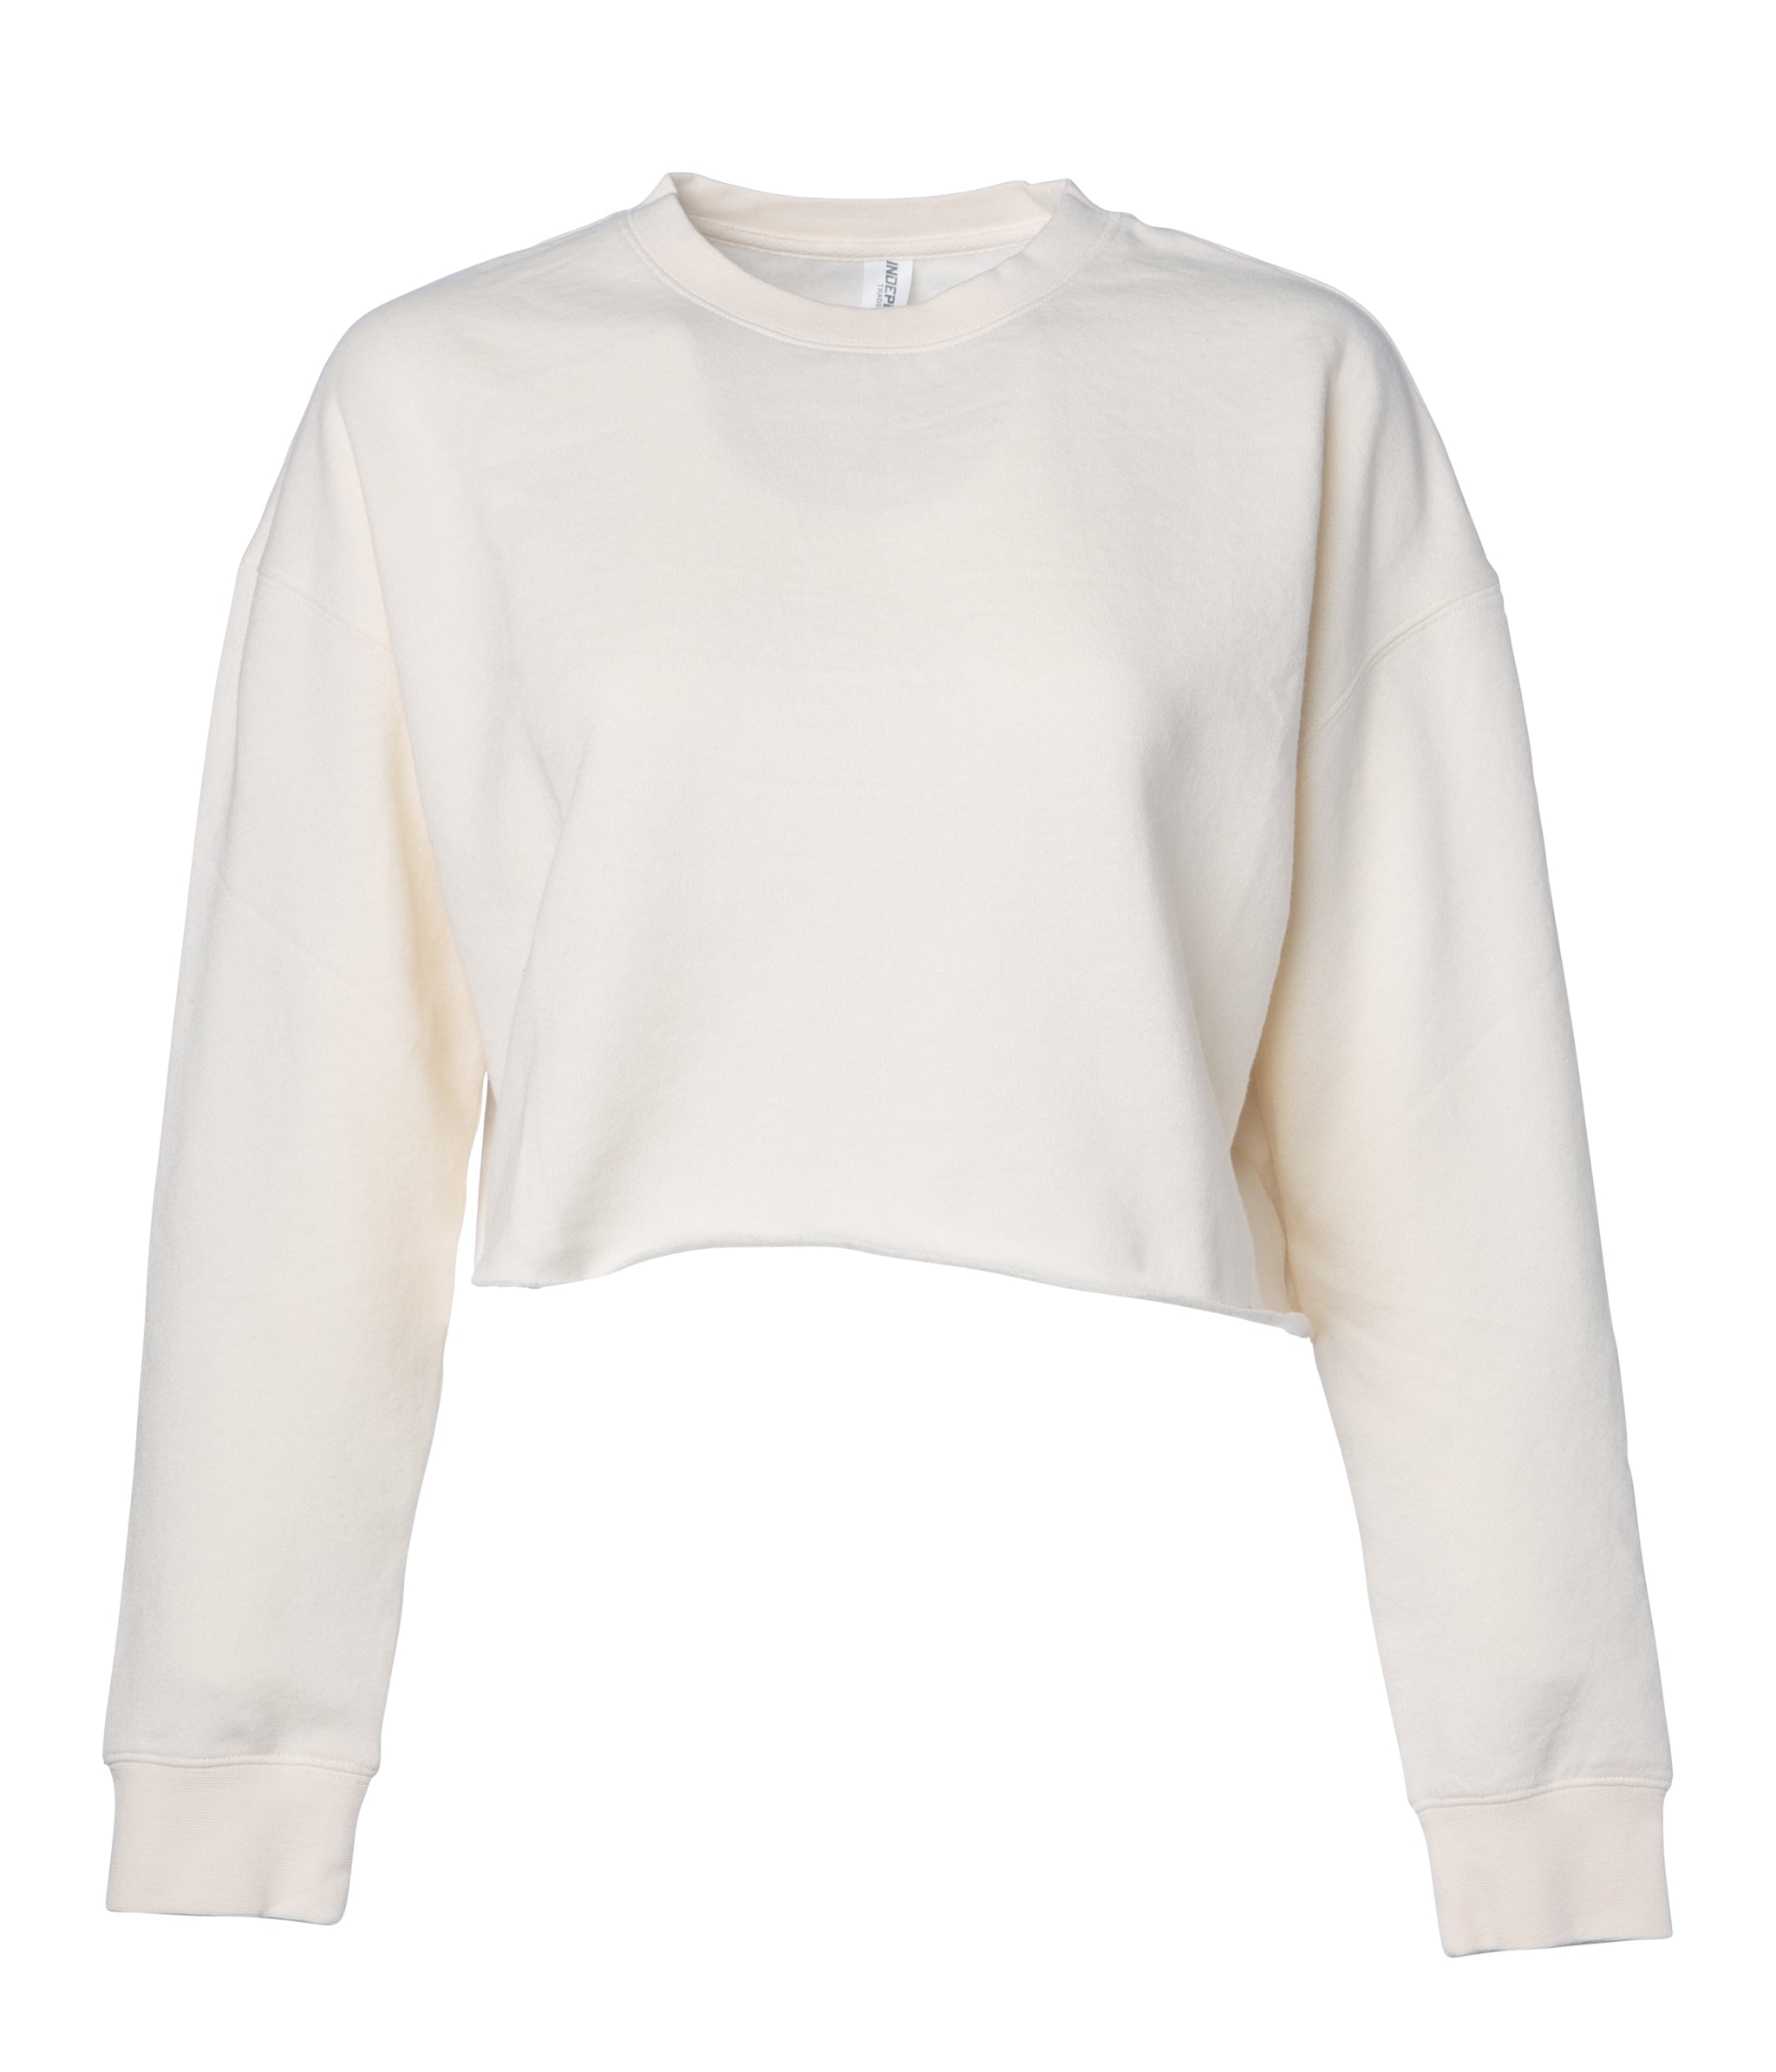 Women\'s Lightweight Crop Crew Neck Sweatshirt | Independent Trading Co. -  Independent Trading Company